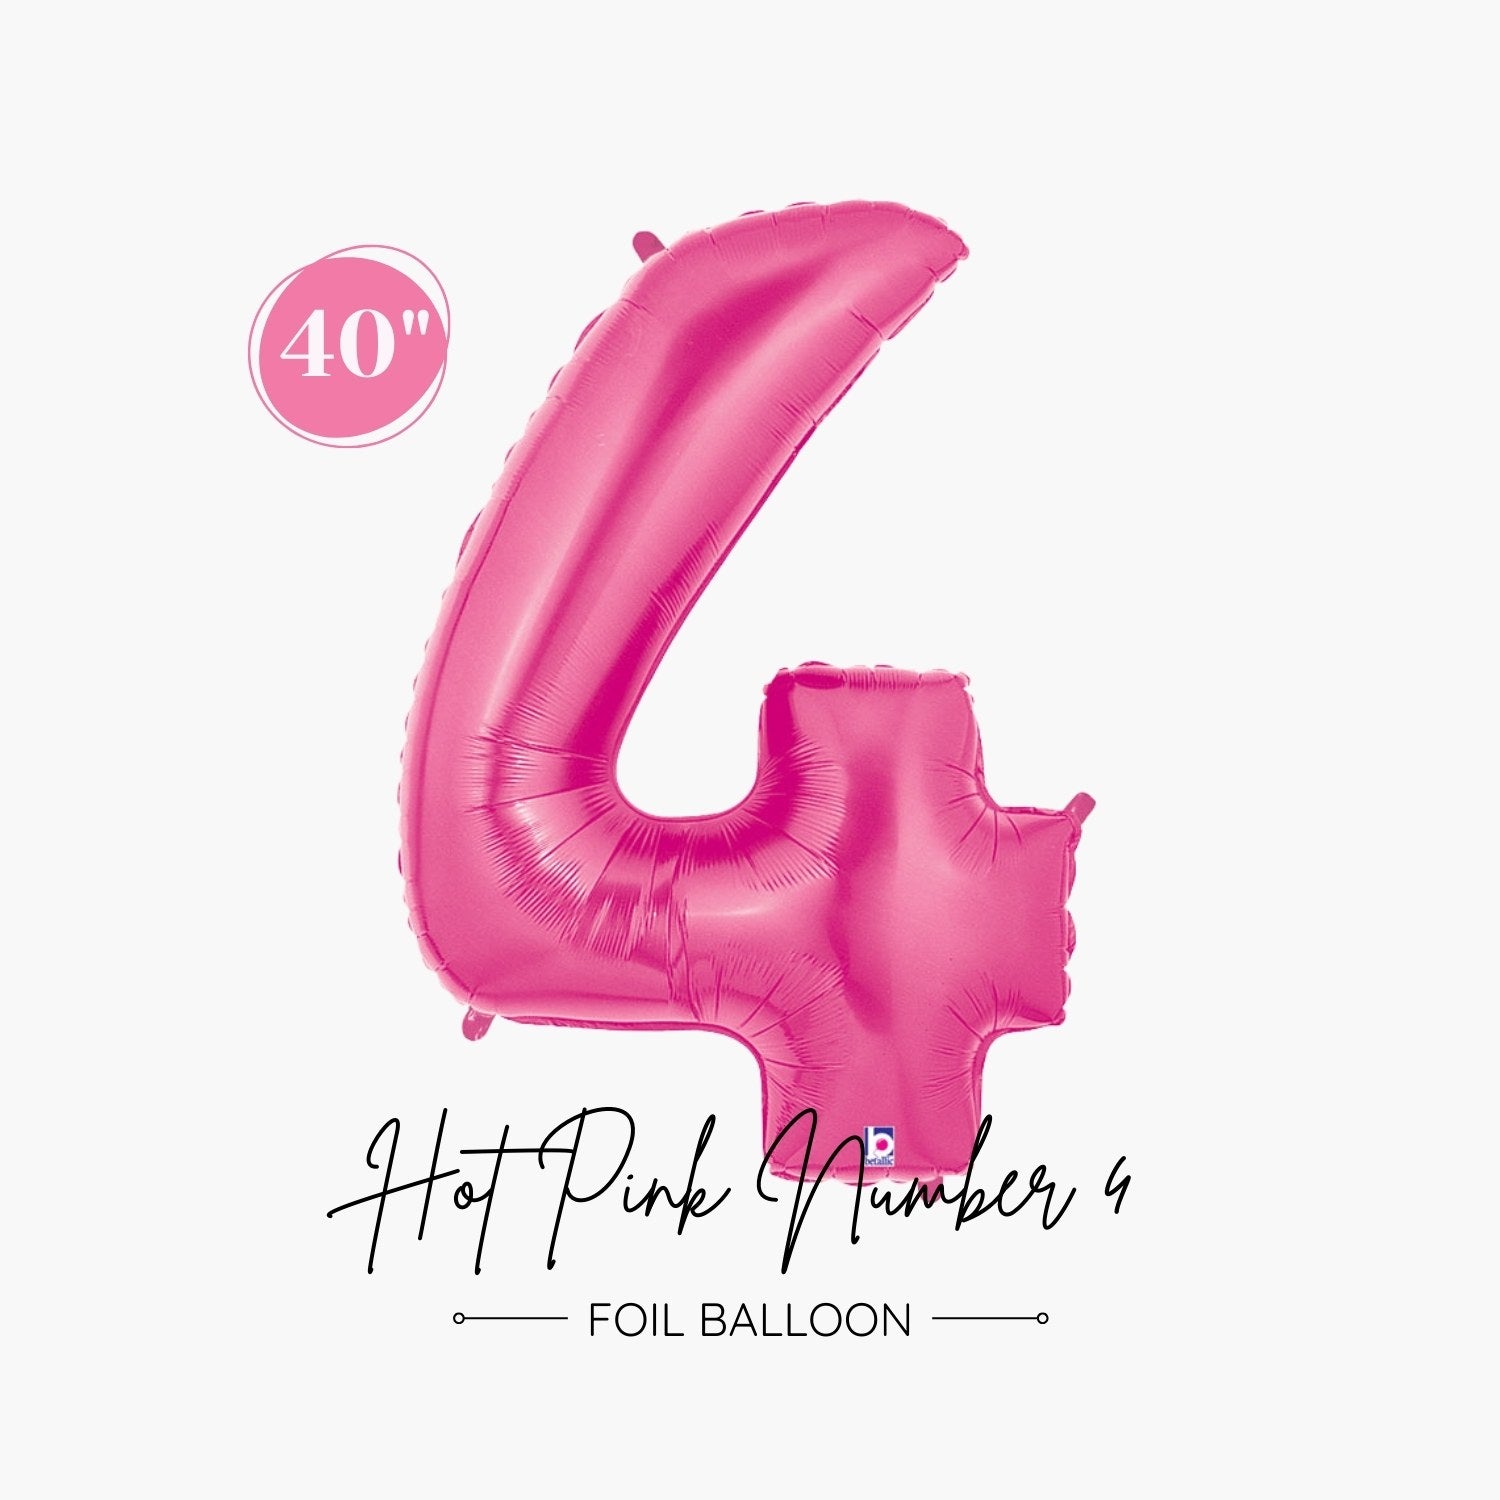 Jumbo Hot Pink Number 4 Foil Balloon - Girl 4th Birthday Party, Princess Party, 4th Anniversary